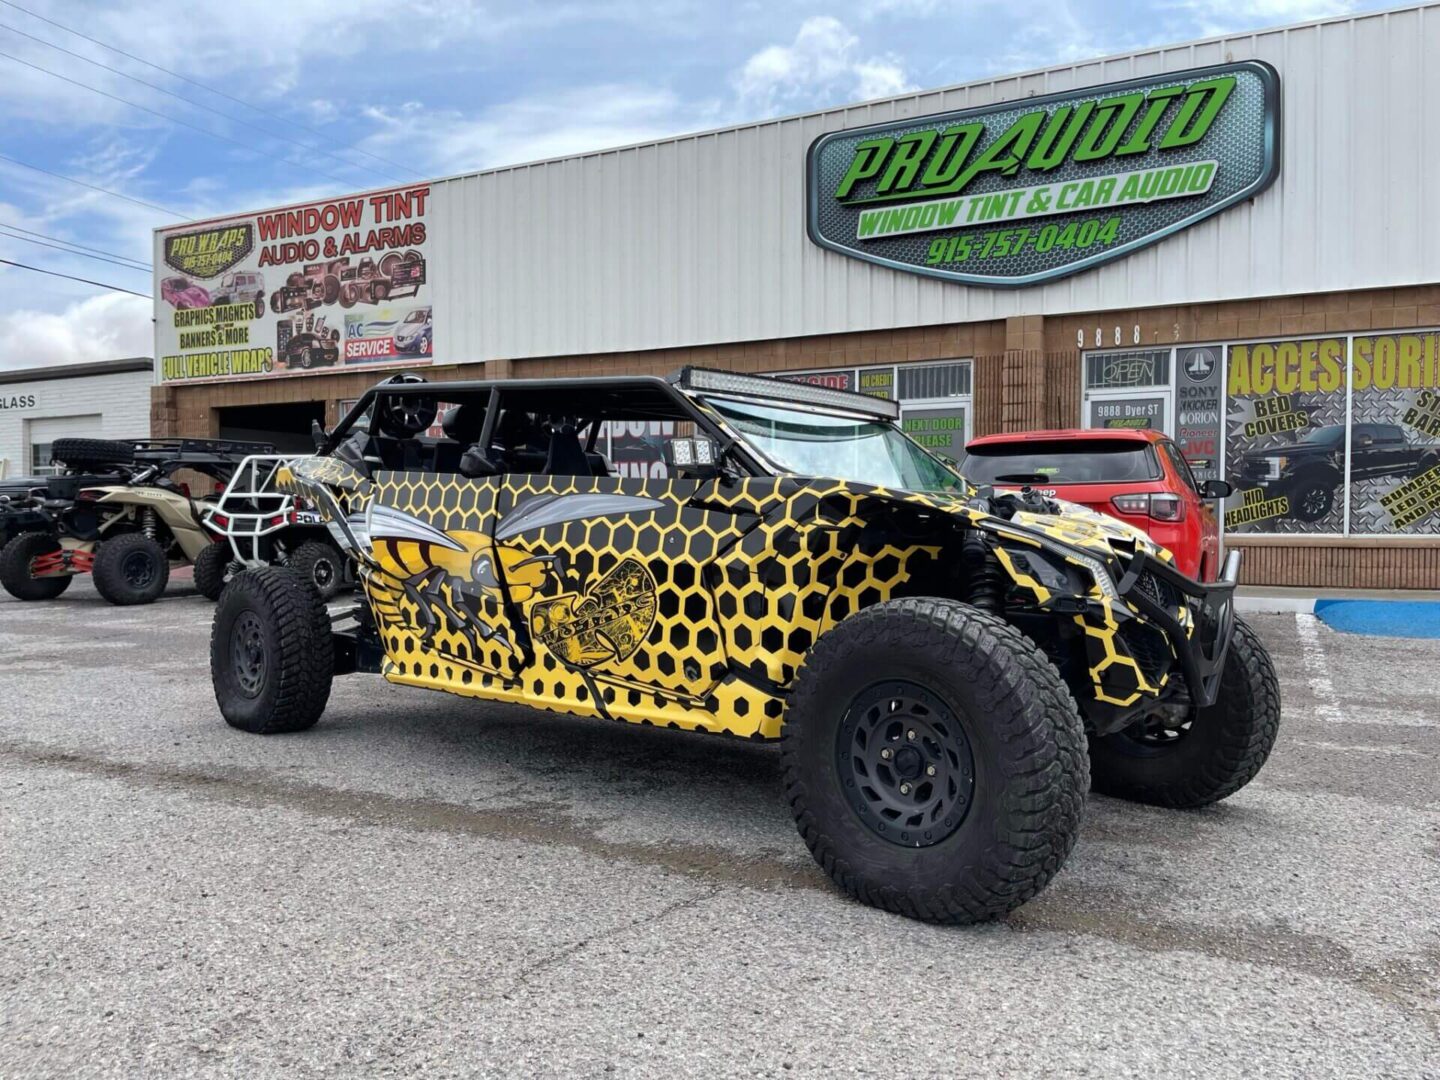 Updated Jeep In Yellow and Black Color